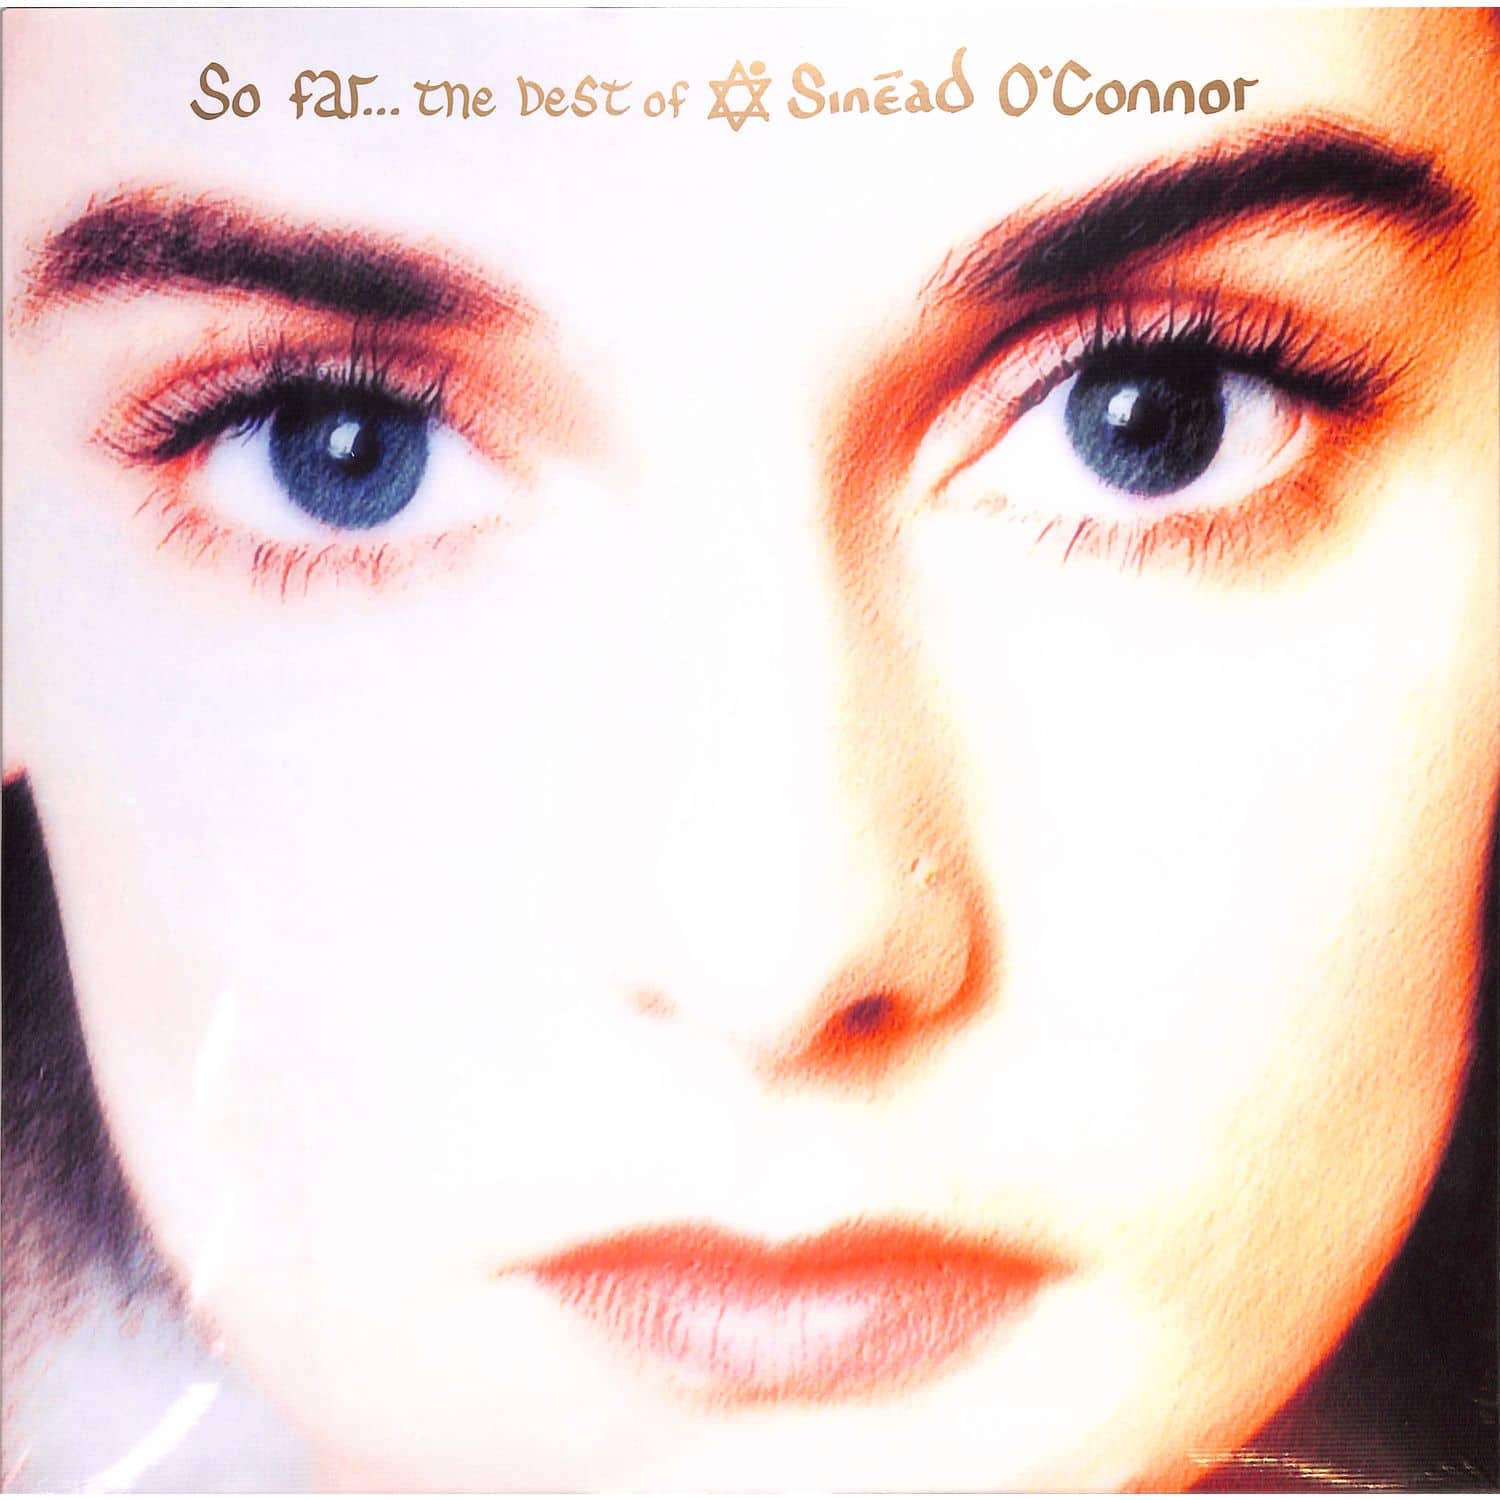 Sinead O Connor - SO FAR...THE BEST OF 